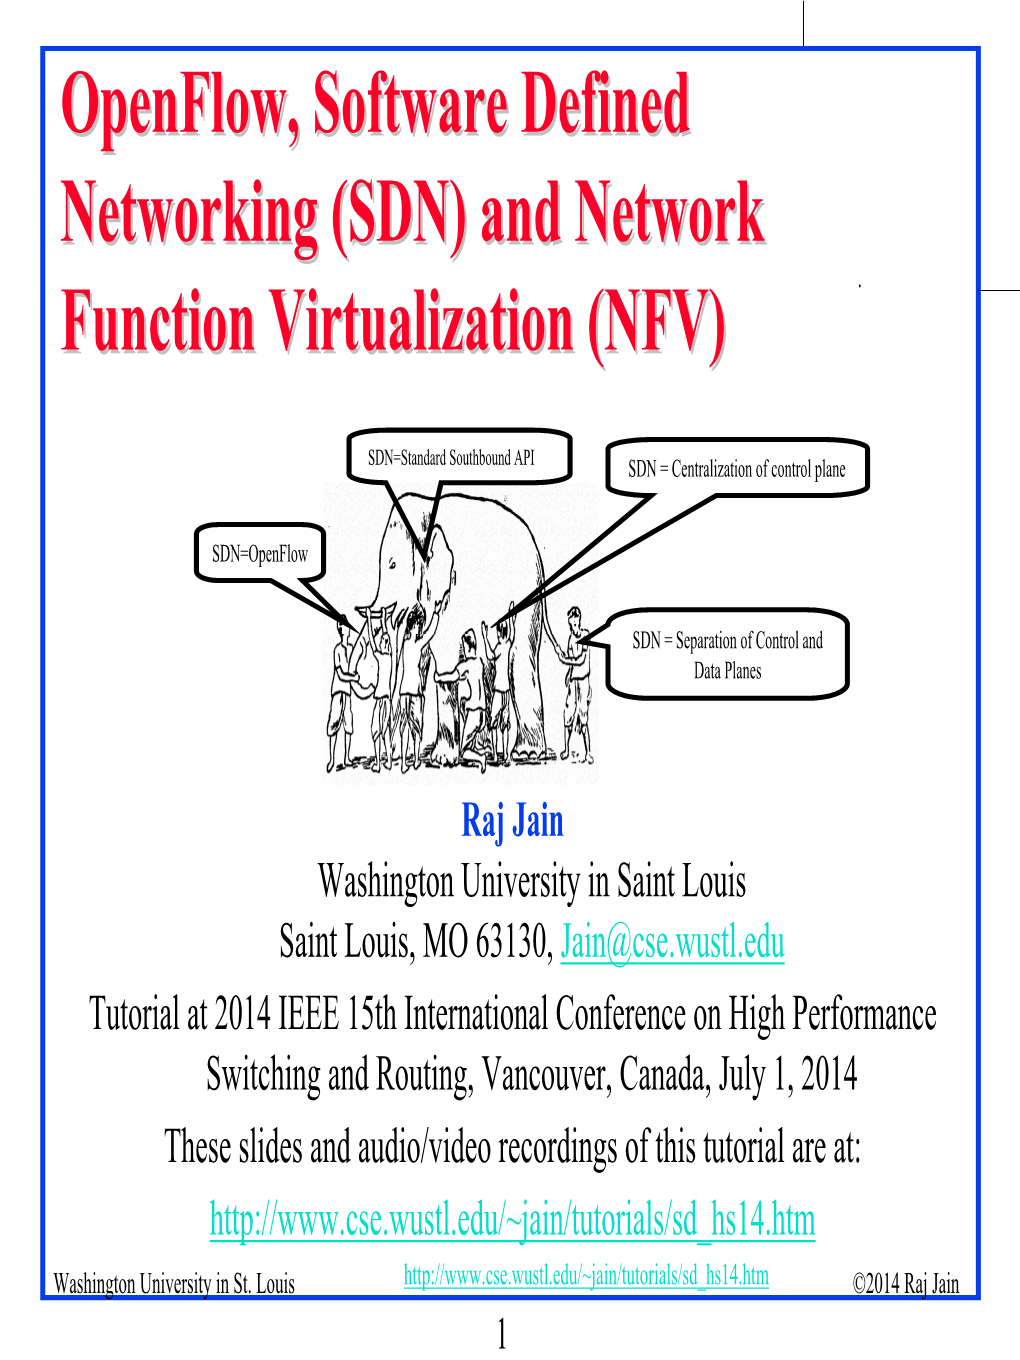 Tutorial on Openflow, Software Defined Networking ( SDN), and Network Function Virtualization (NFV)